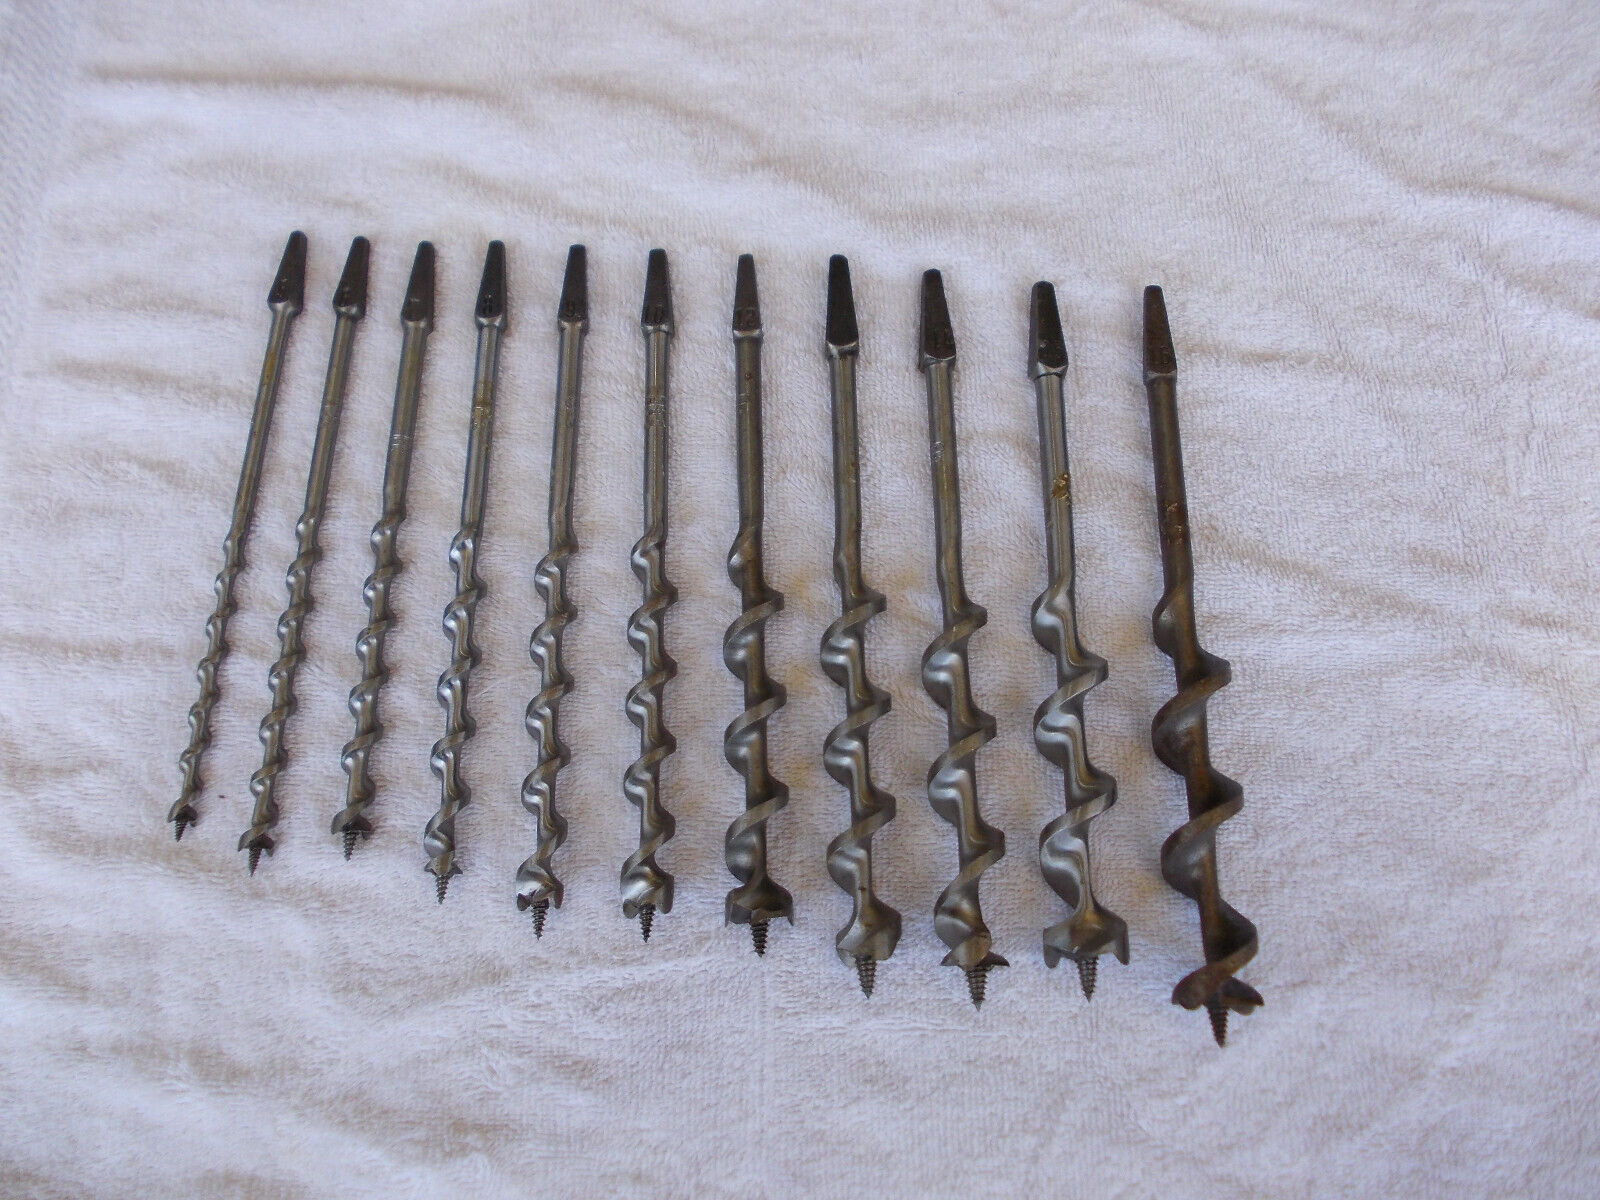 Vintage Stanley Brace Auger Bits New Old Stock Tools 11PC USA